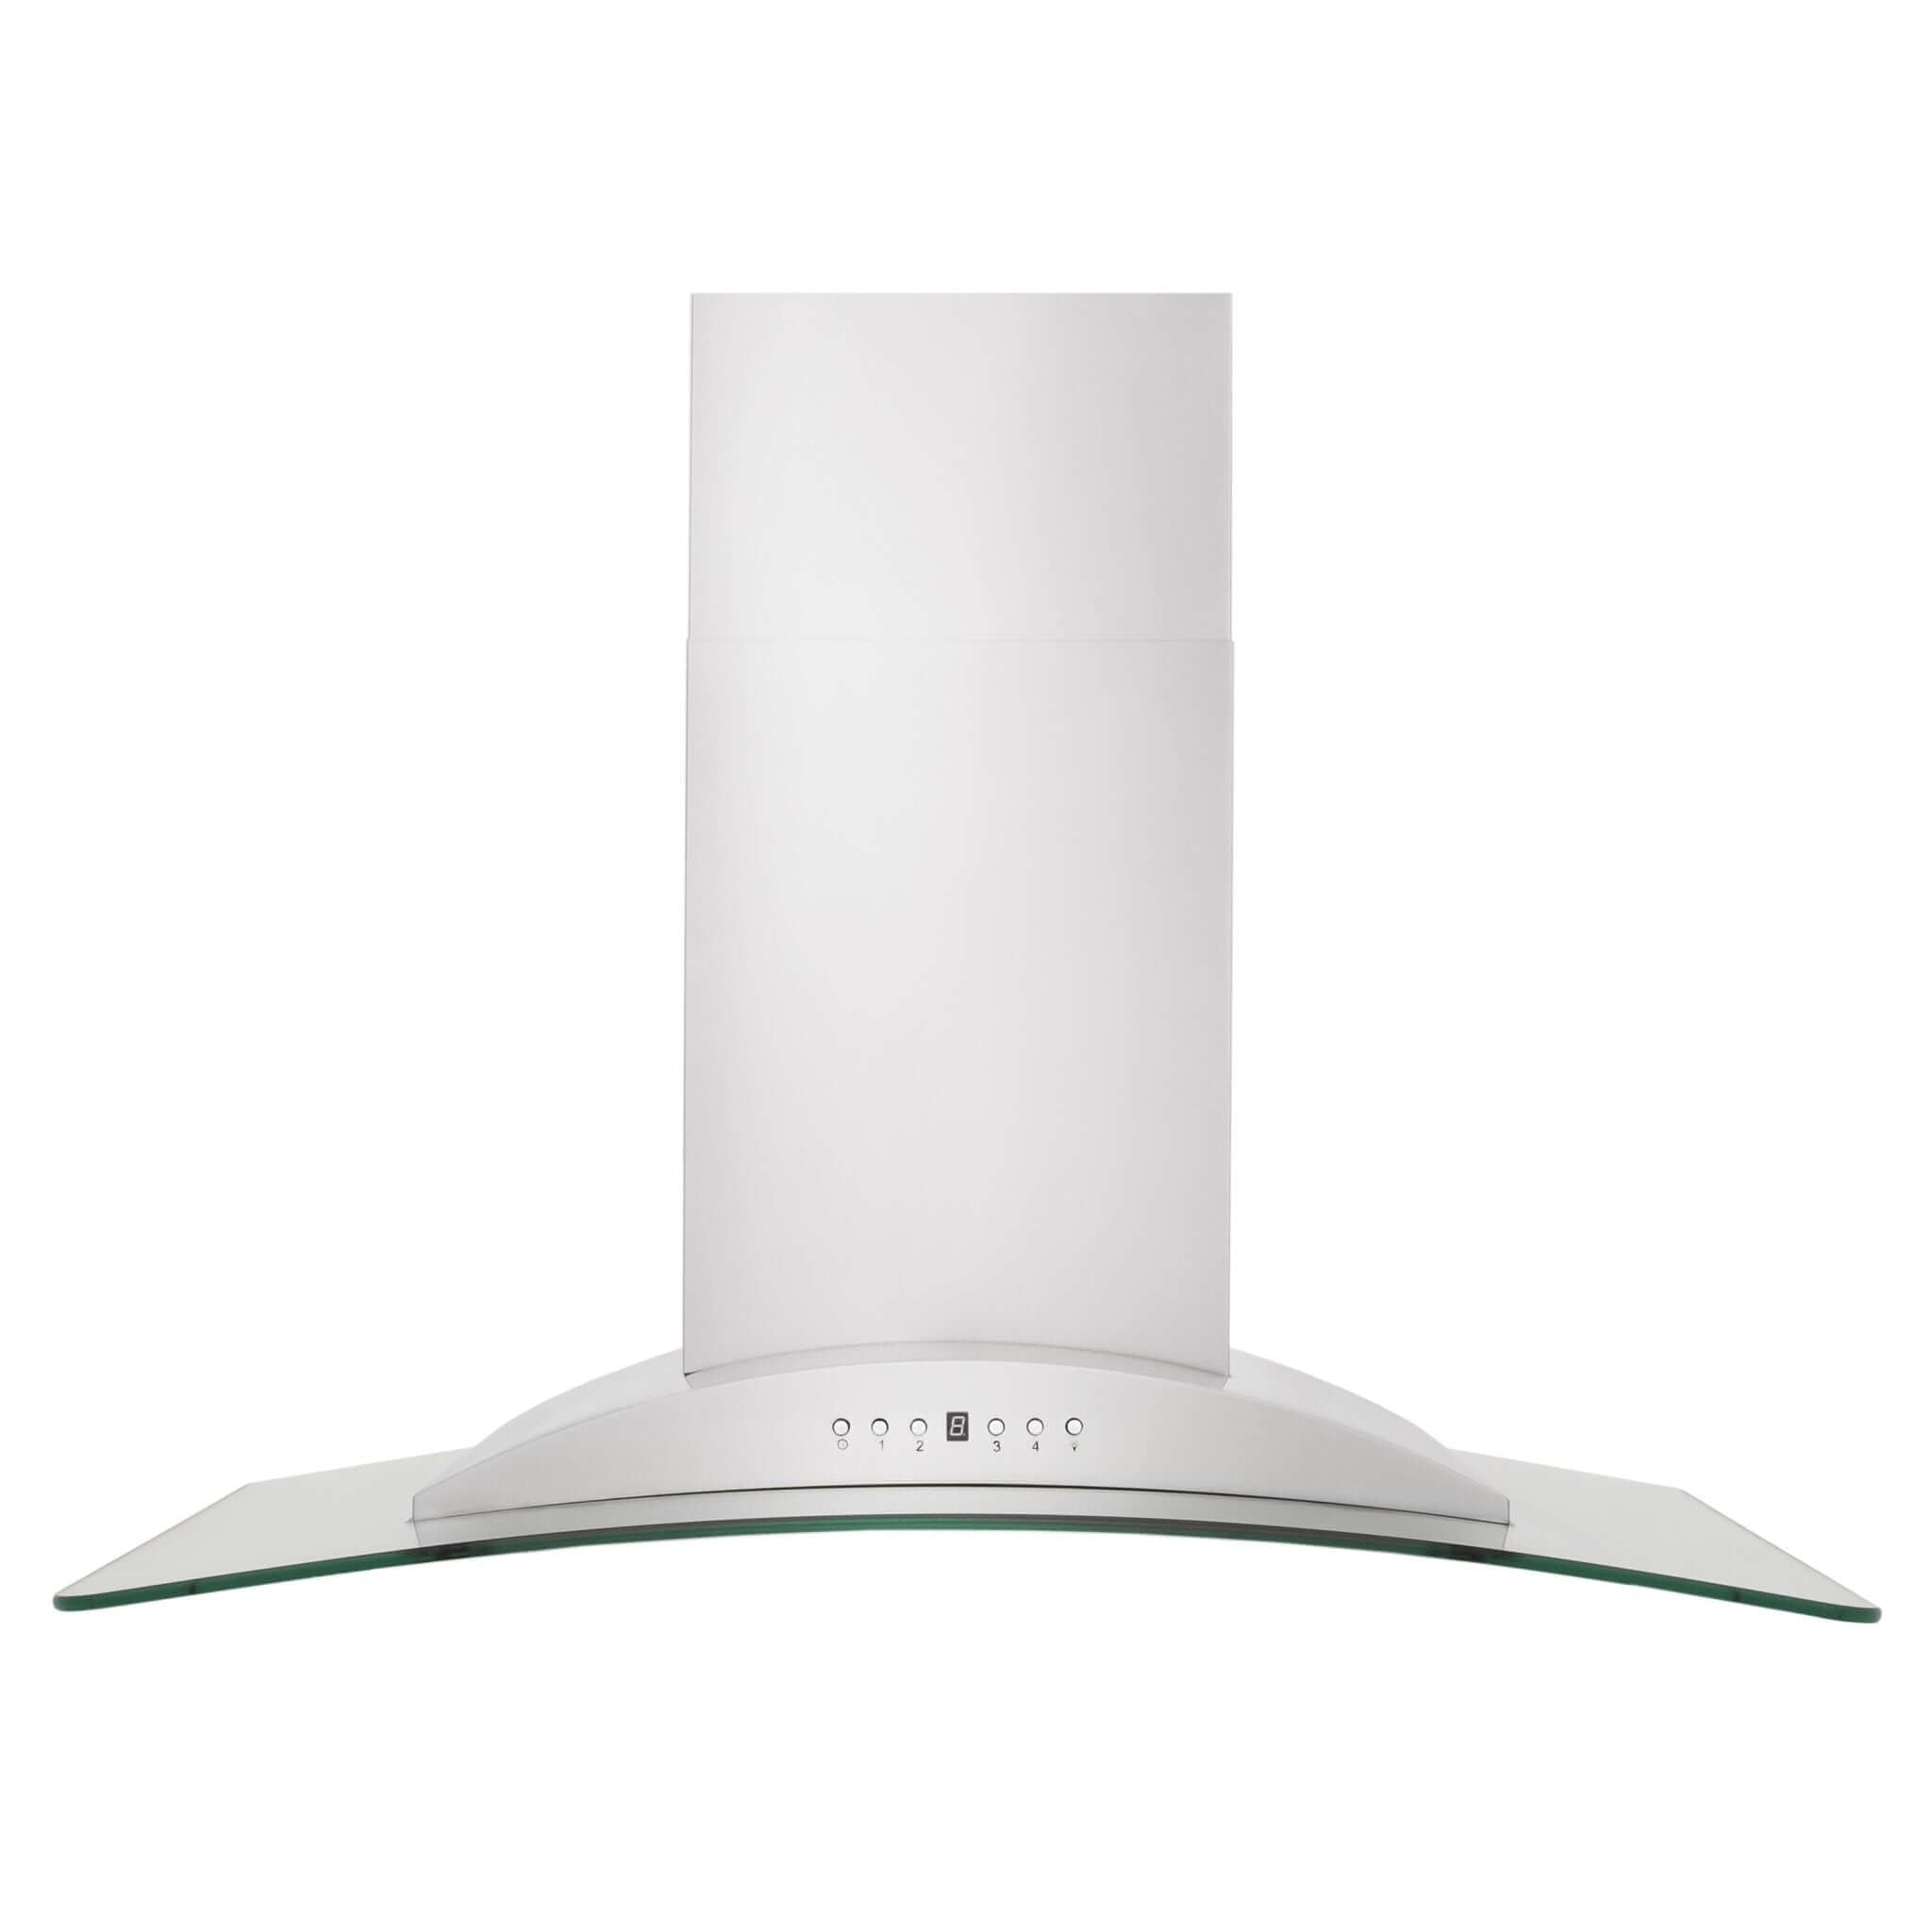 ZLINE Convertible Vent Wall Mount Range Hood in Stainless Steel & Glass (KN) front.